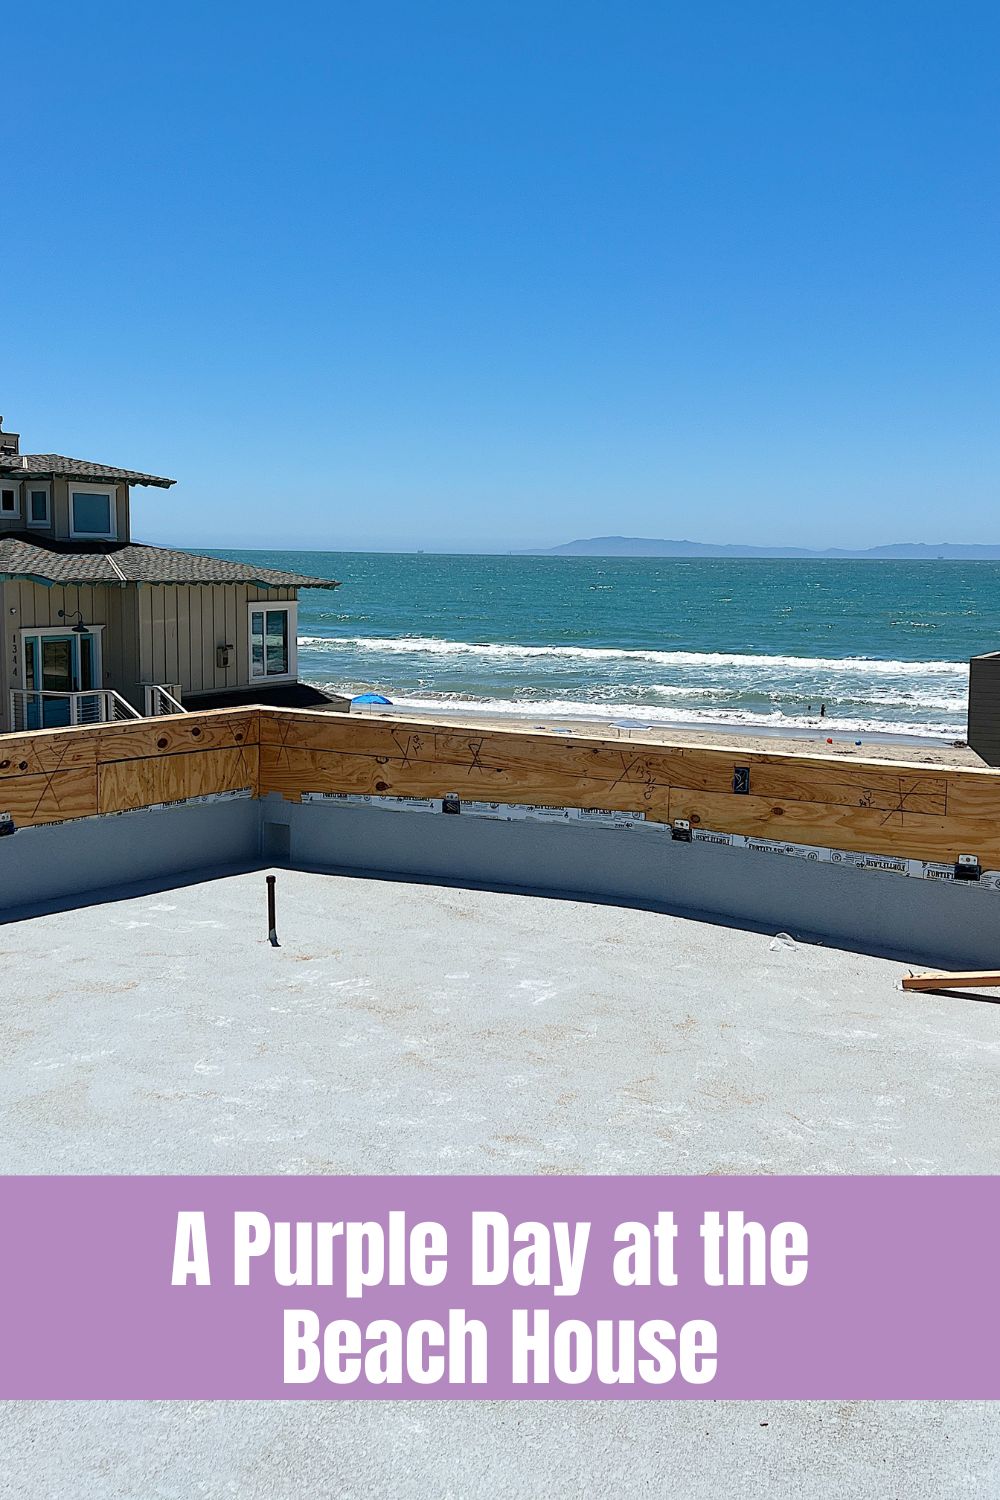 We spent all day Saturday at the beach house and I really do refer to it as a Light Purple Day at the beach house. Wait, what?